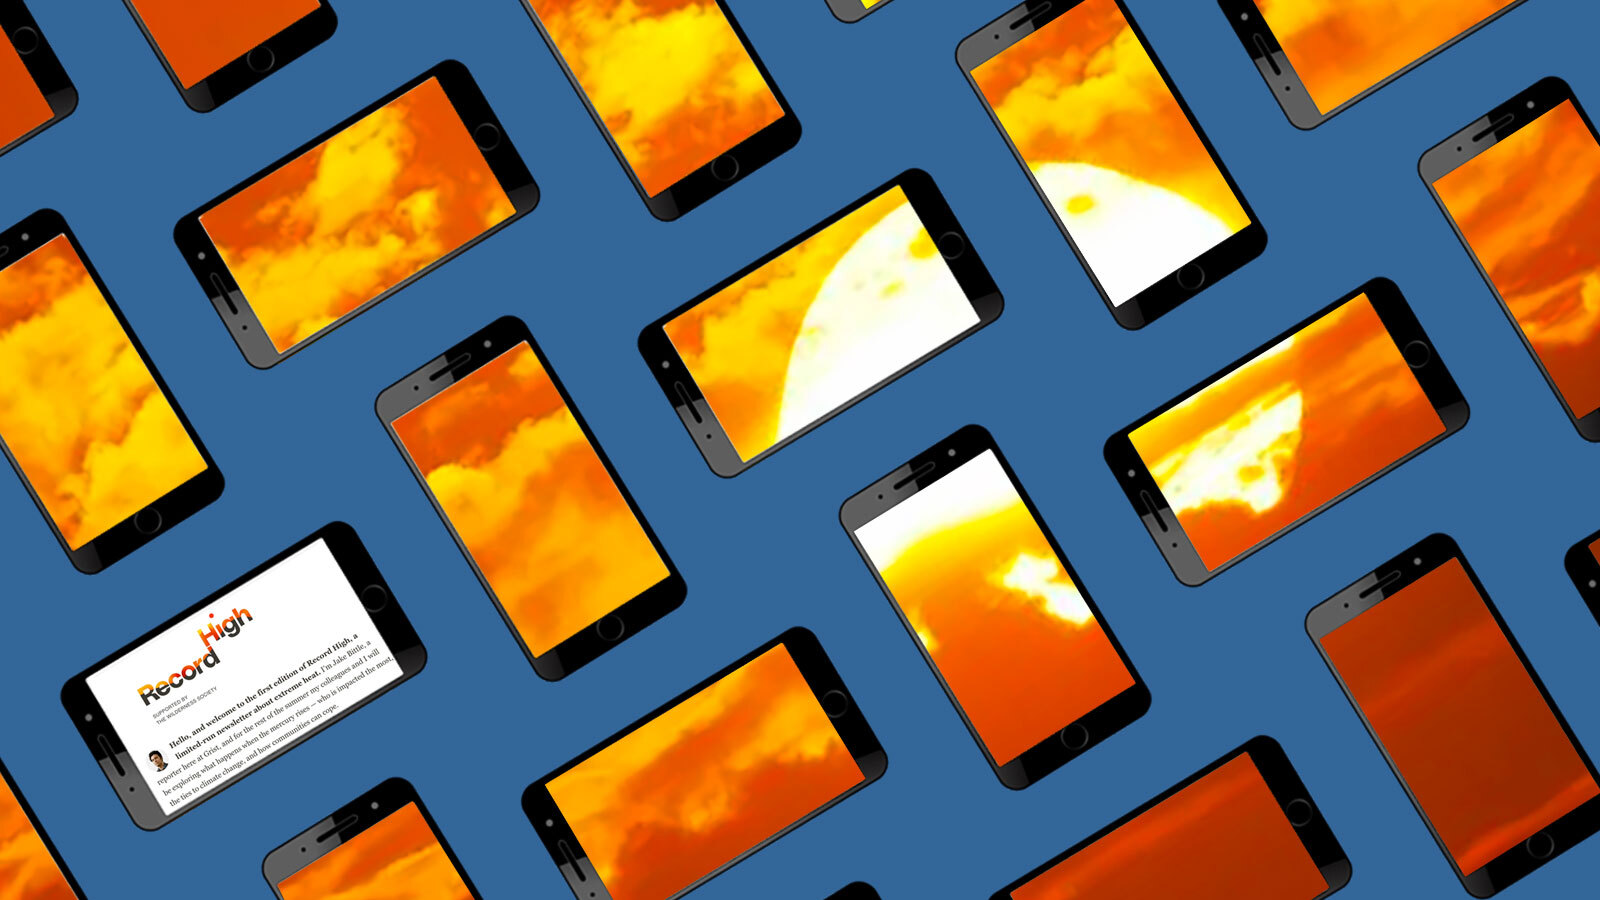 An image of phones with orange screens on a blue background.